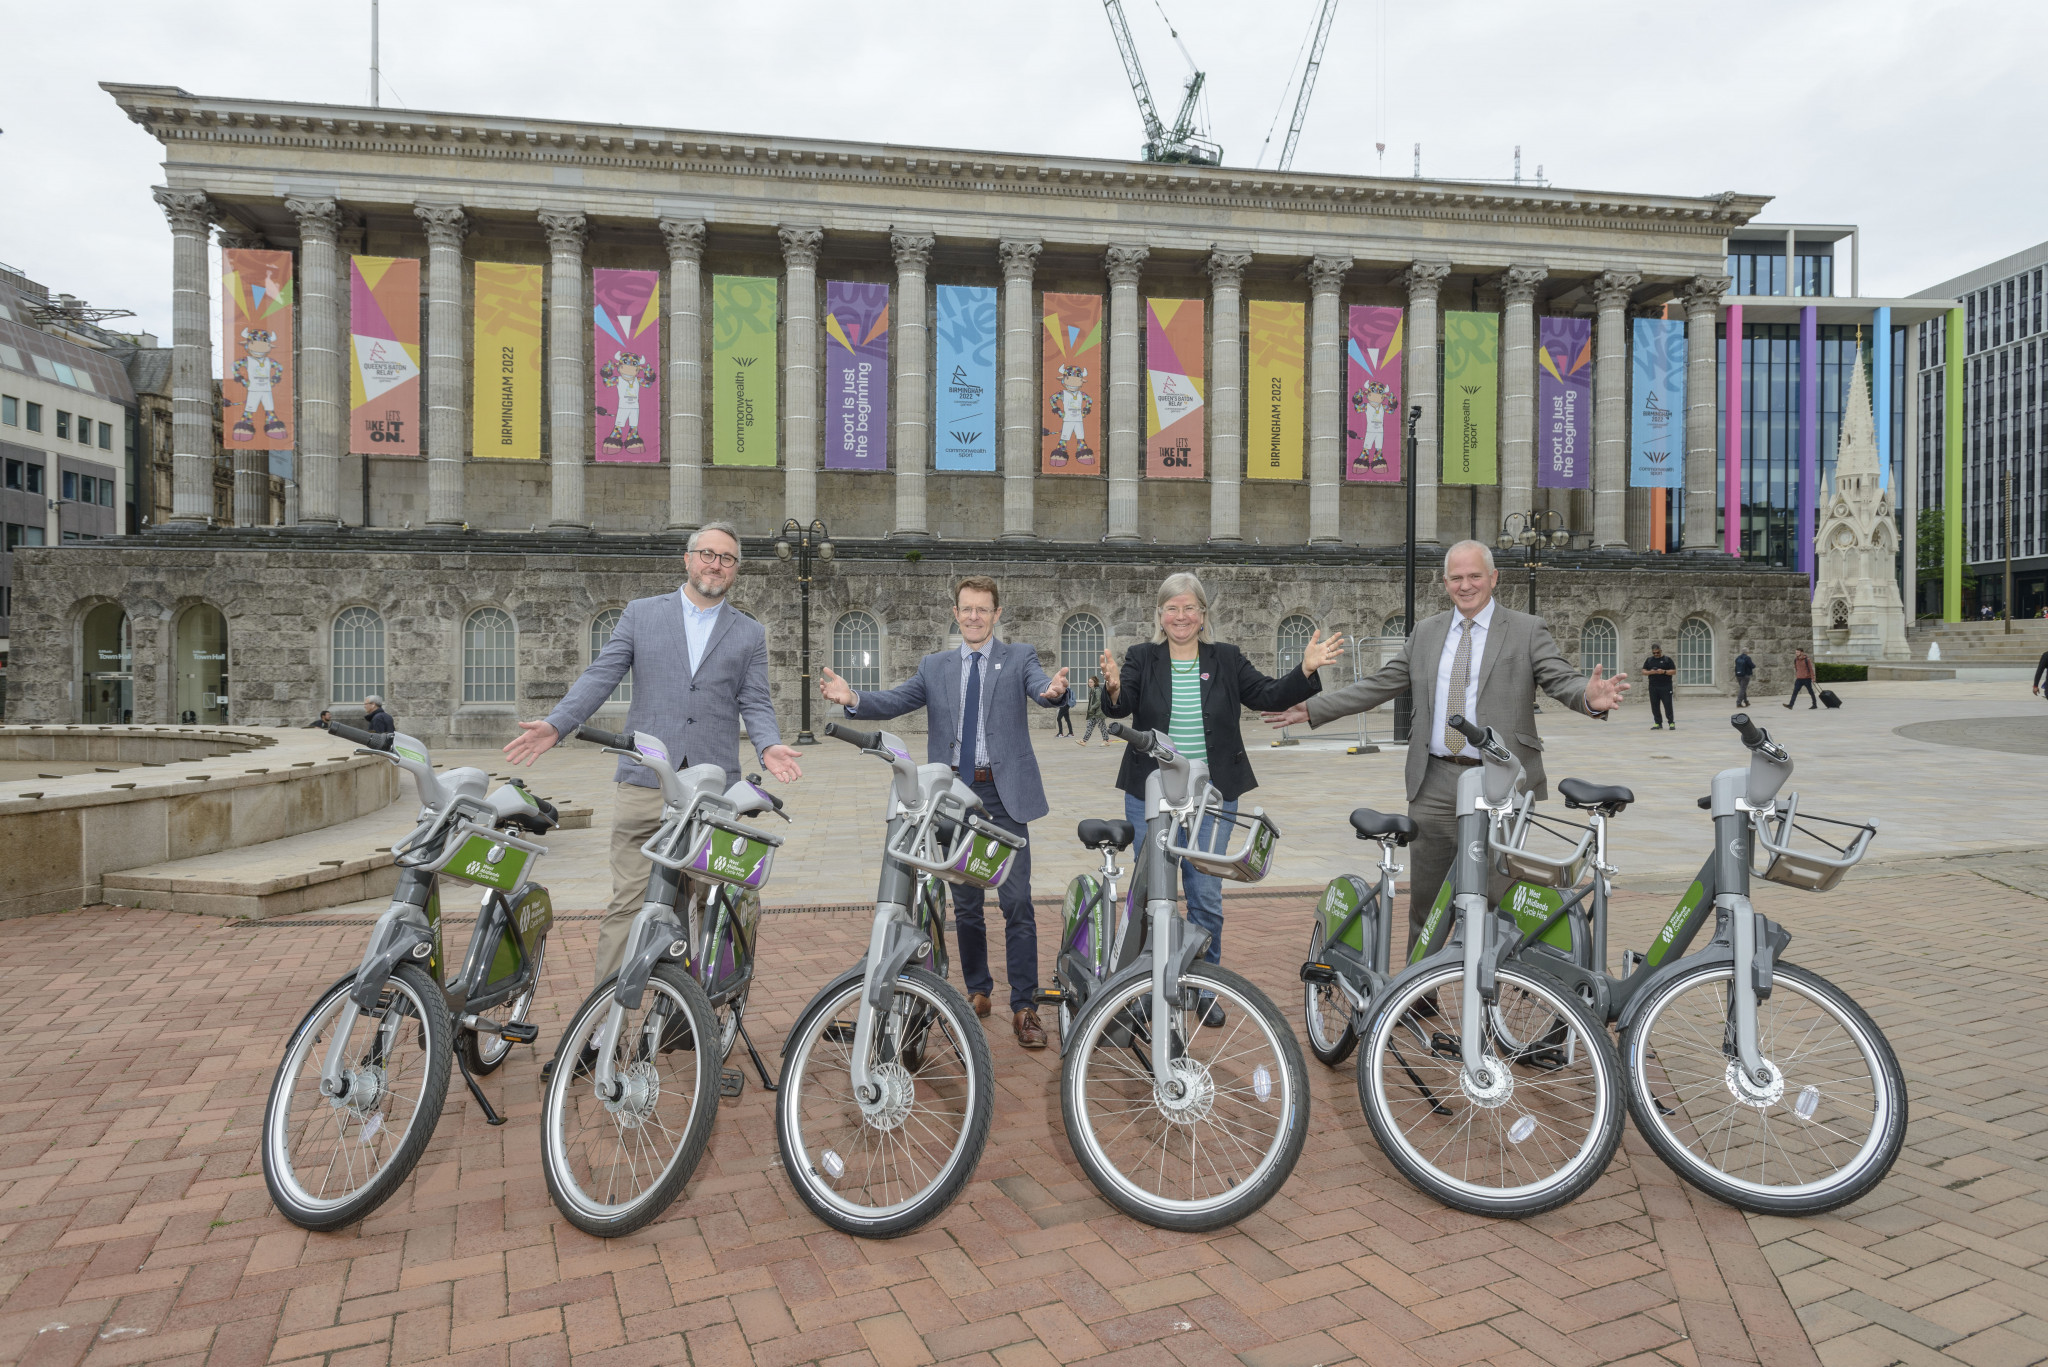 A total of 1,500 bikes across the West Midlands are to be made available for free rides during the Commonwealth Games ©West Midlands Combined Authority 